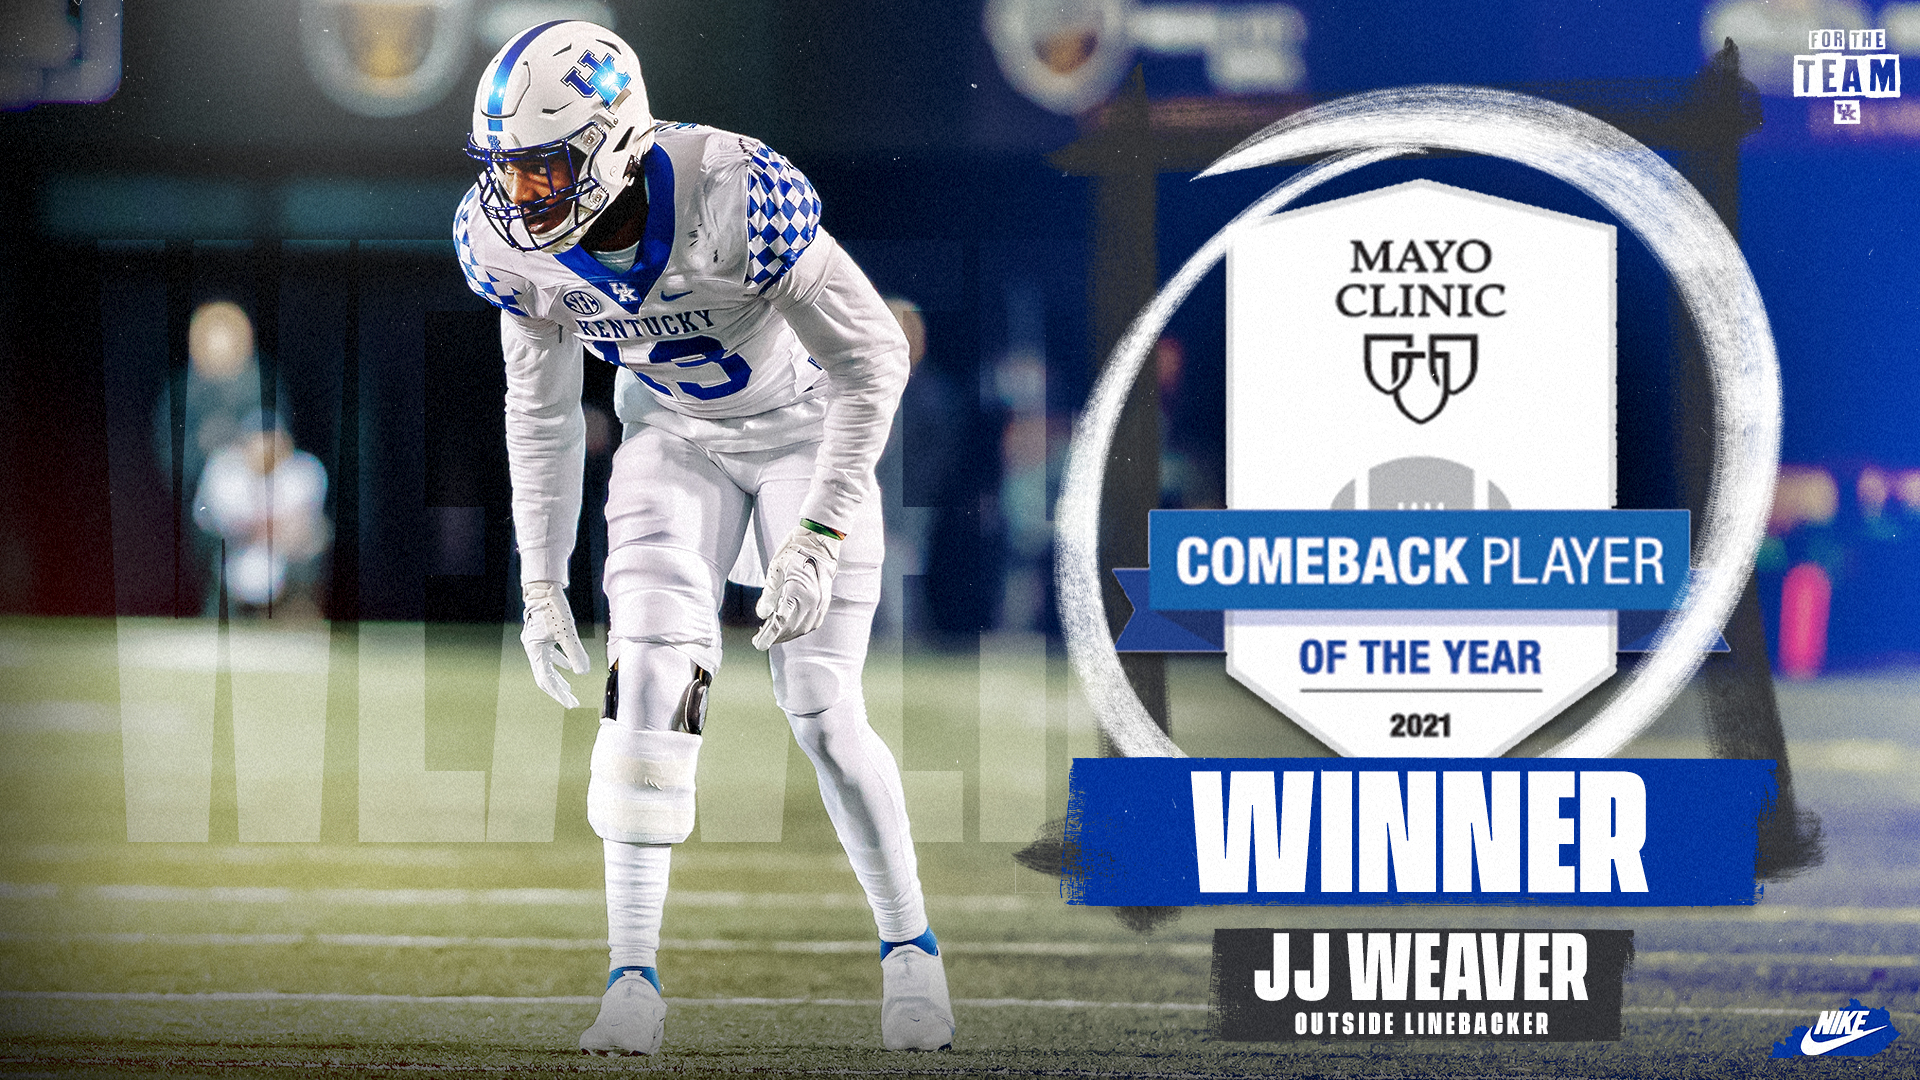 J.J. Weaver Named Mayo Clinic Comeback Player of the Year